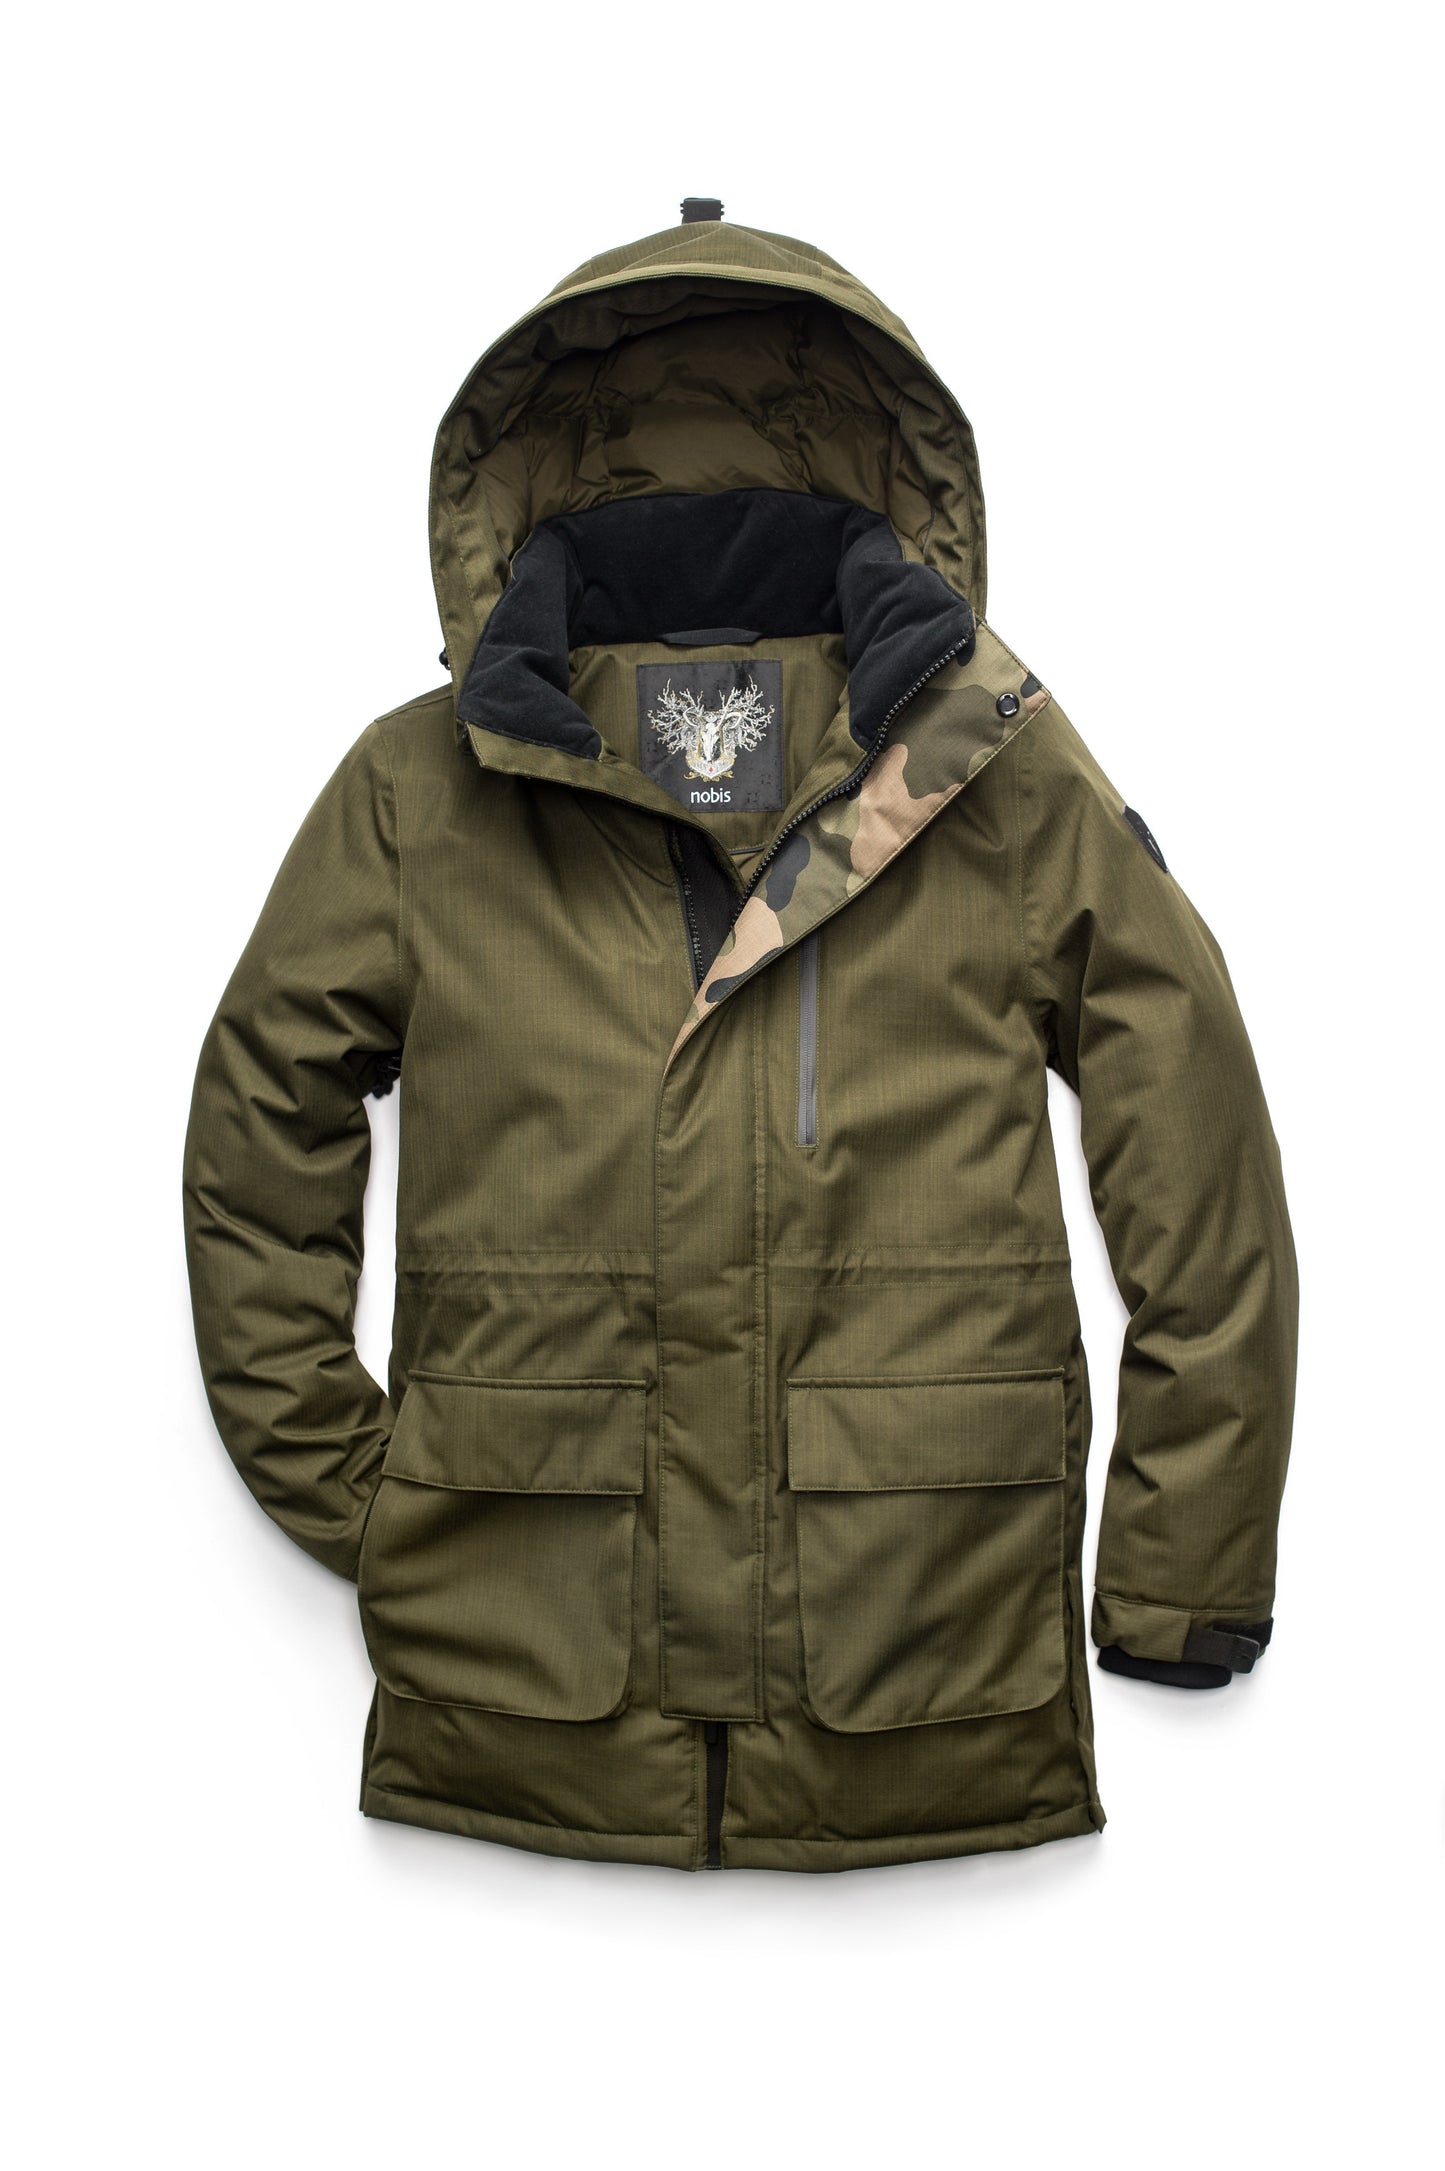 Mid weight men's down filled parka with two patch pockets at the hip and snap closure side vents in Fatigue